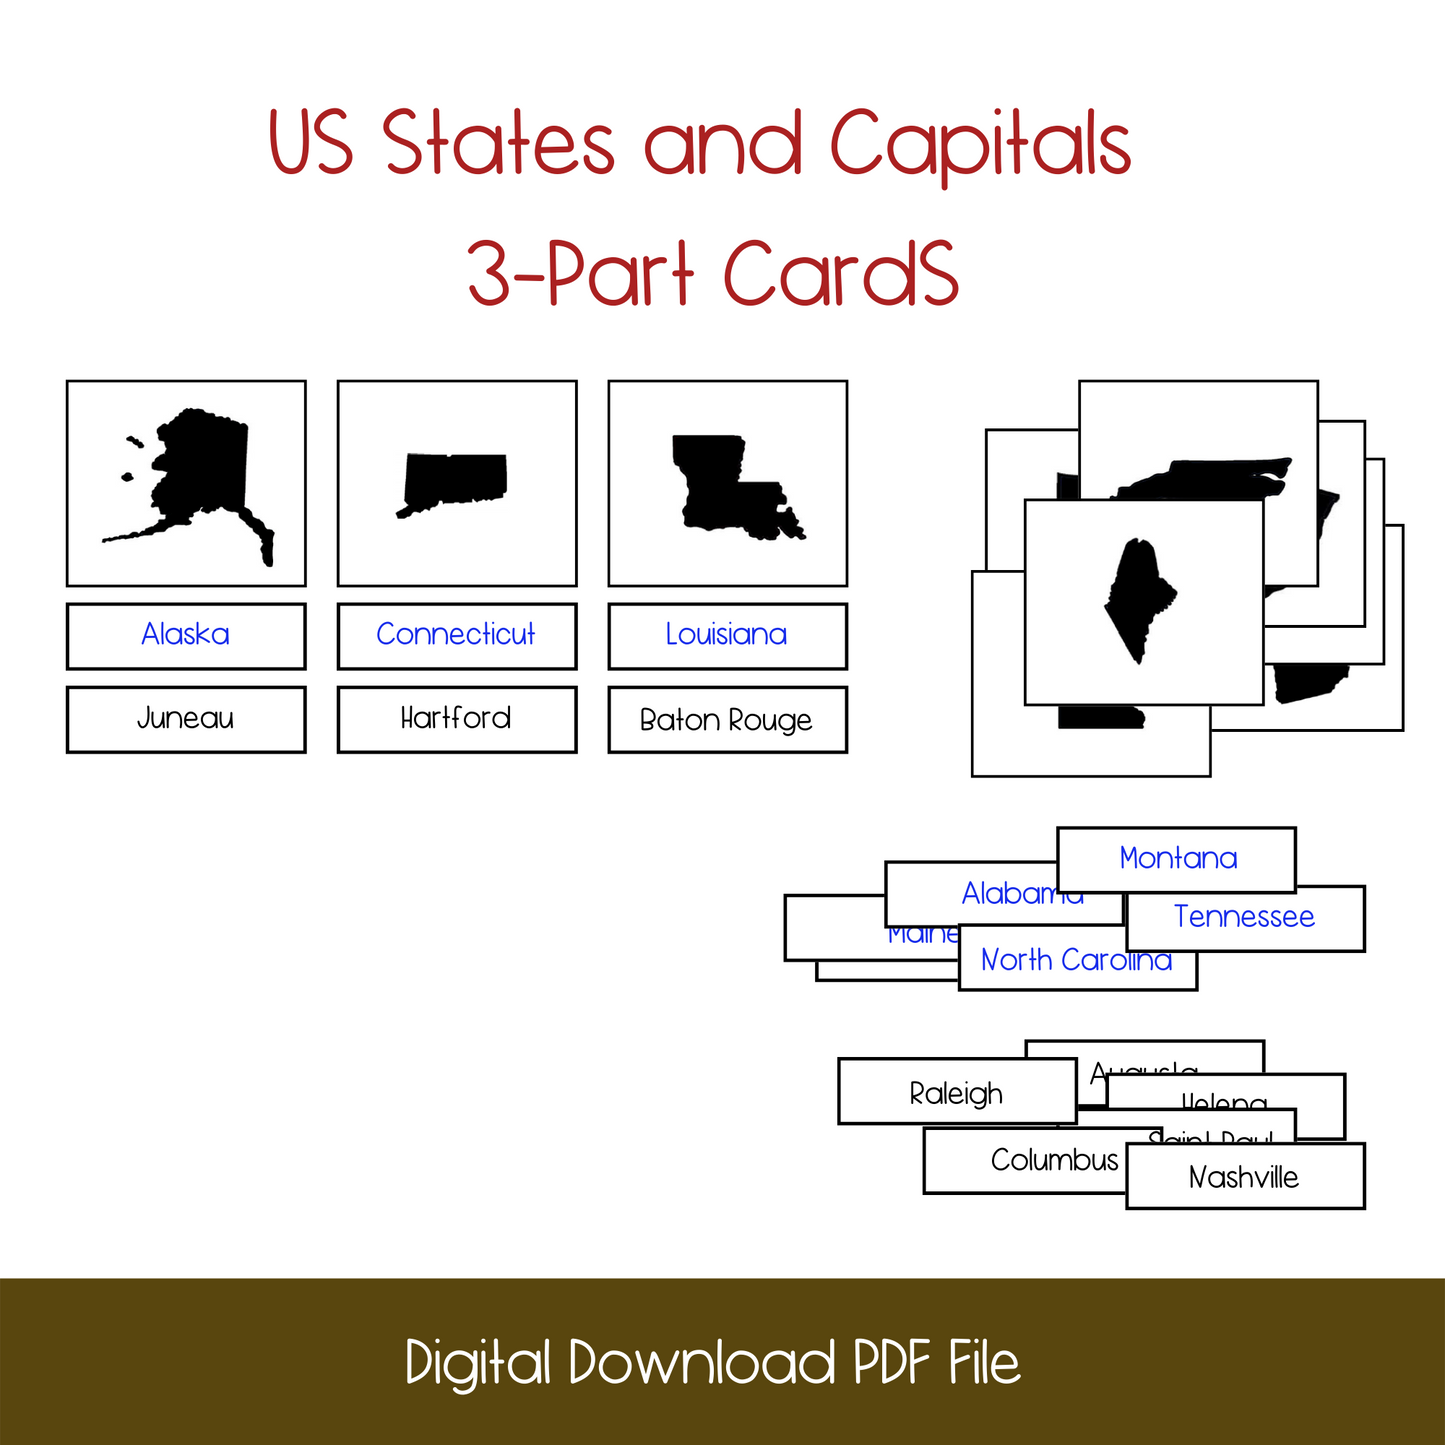 printable us states and capitals 3-part cards, nomenclature cards lesson activity